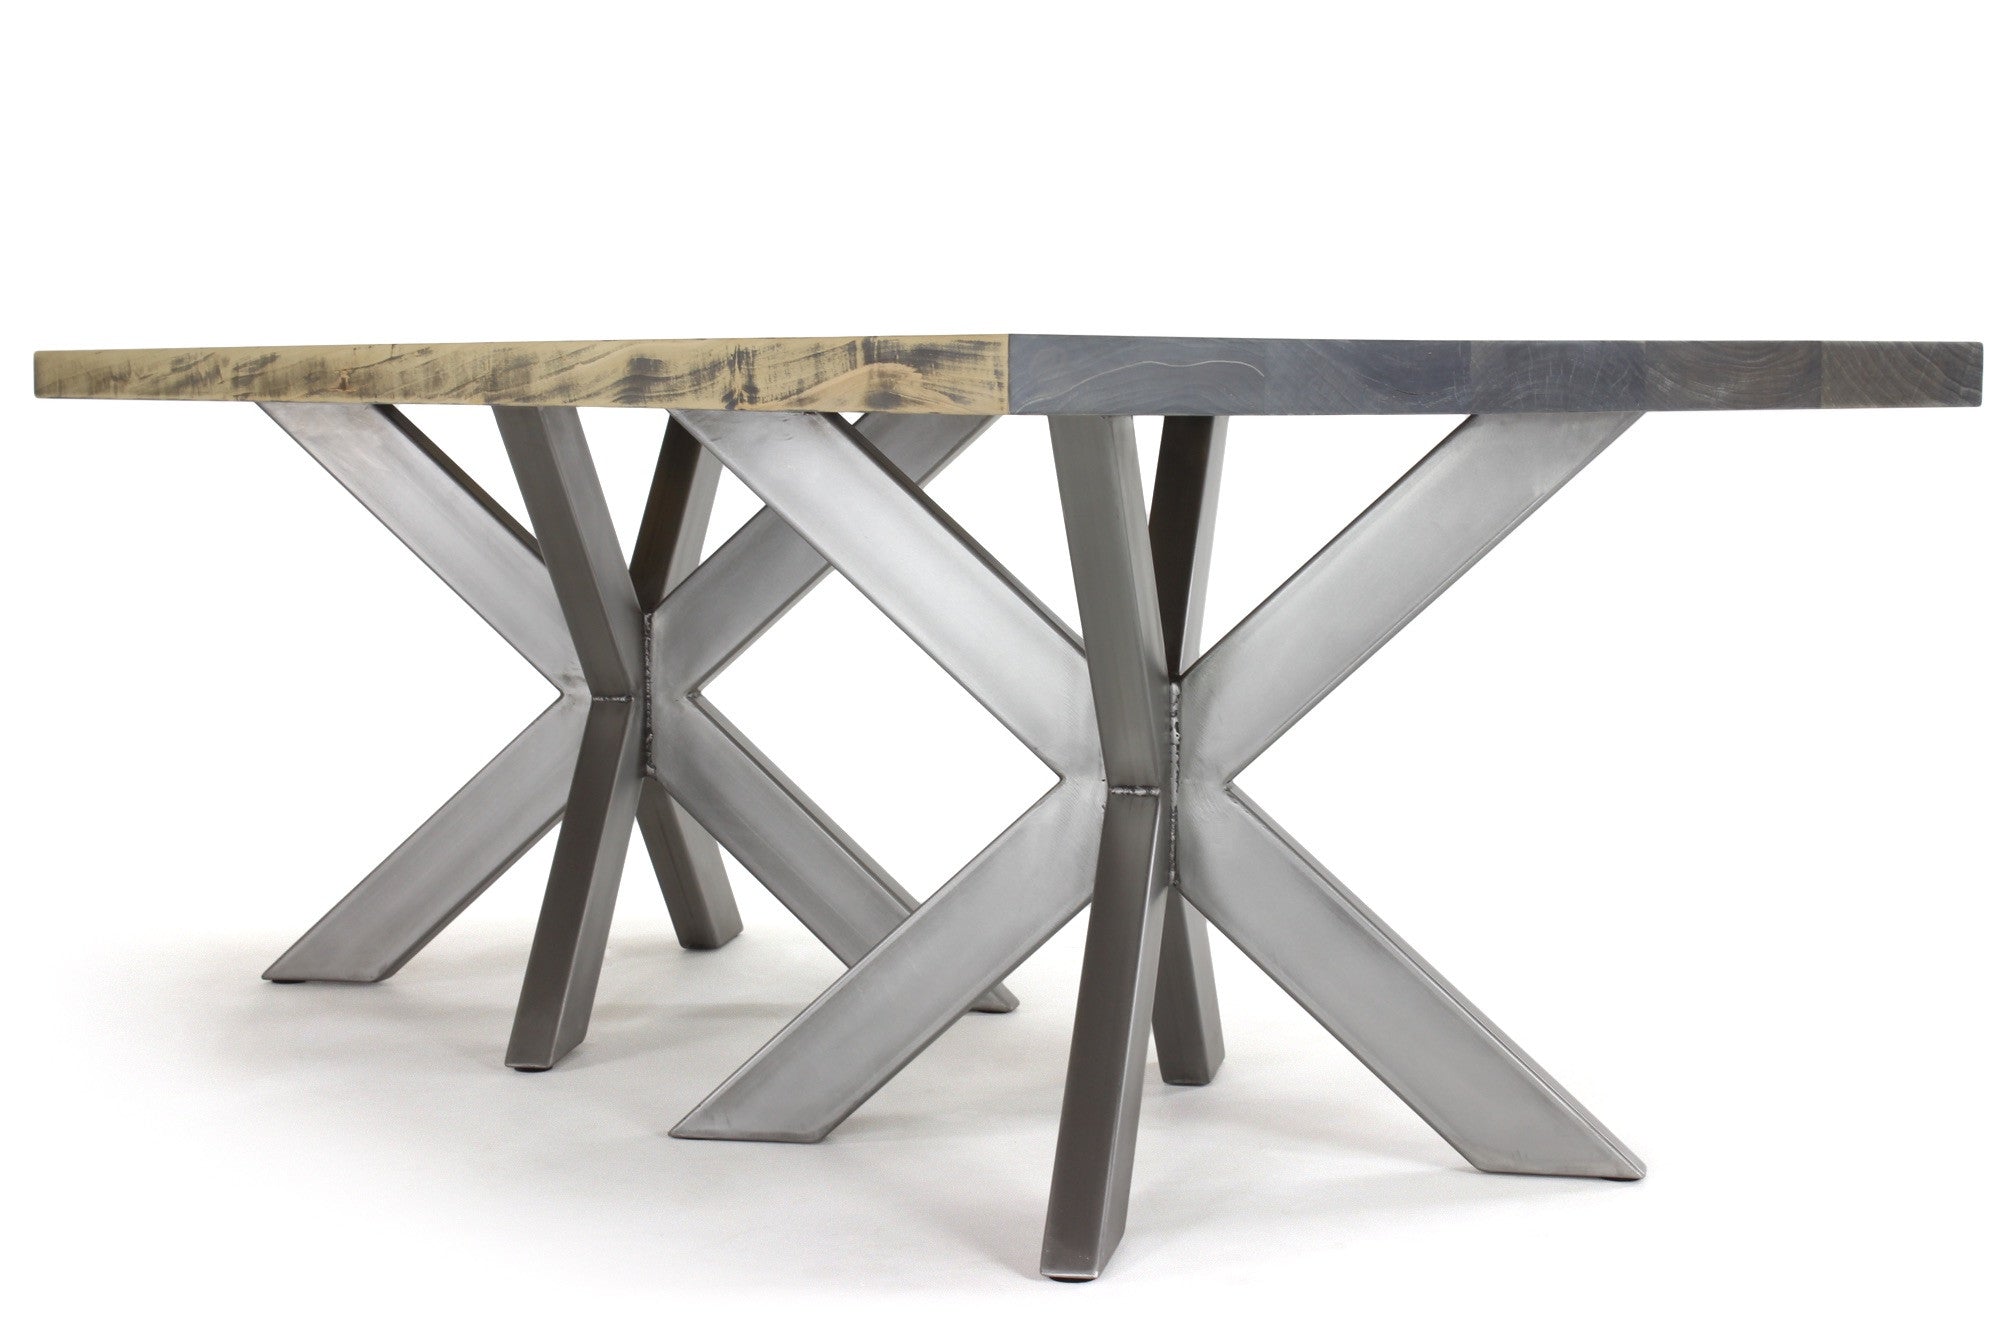 7' double jak dining table | worn maple wood finish with stainless steel